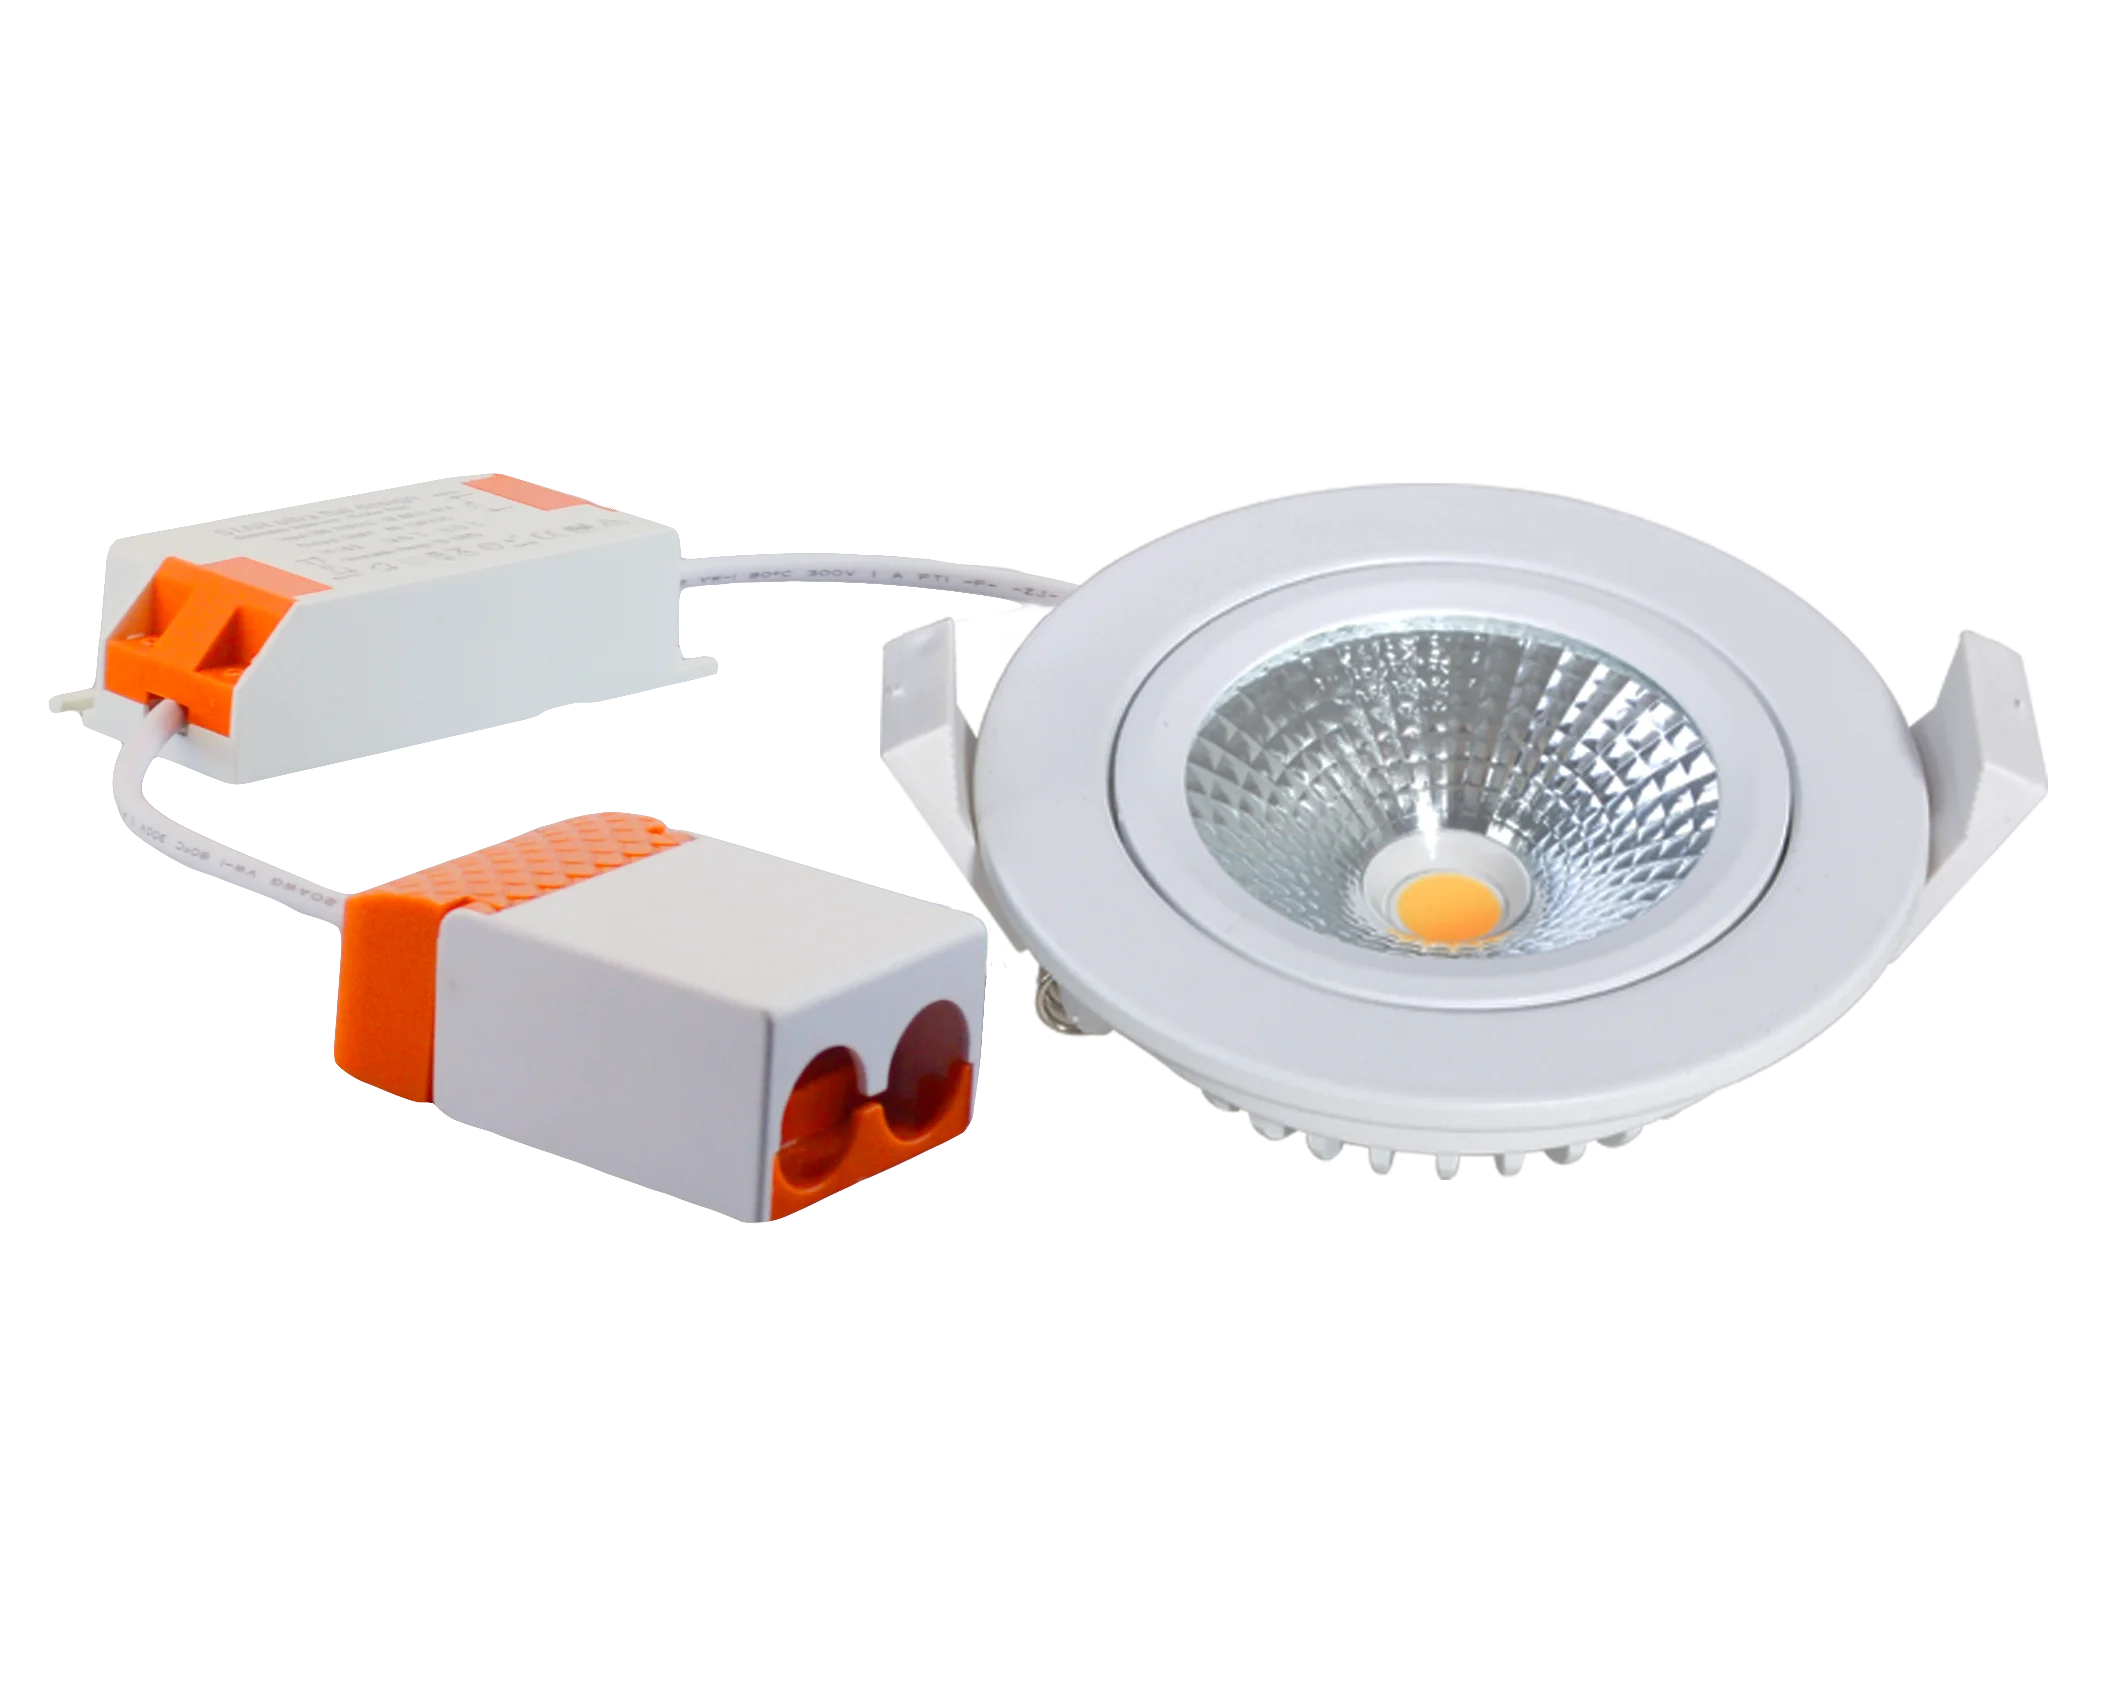 tread Precede Precursor Berdis Super Thin Commercial Led Downlight Ceiling Recessed Ip54 8w 10w 12w  Round Slim Downlight With Junction Box - Buy Ultra Slim Led Downlight,Round  Slim Downlight,Ip54 Led Downlight Product on Alibaba.com